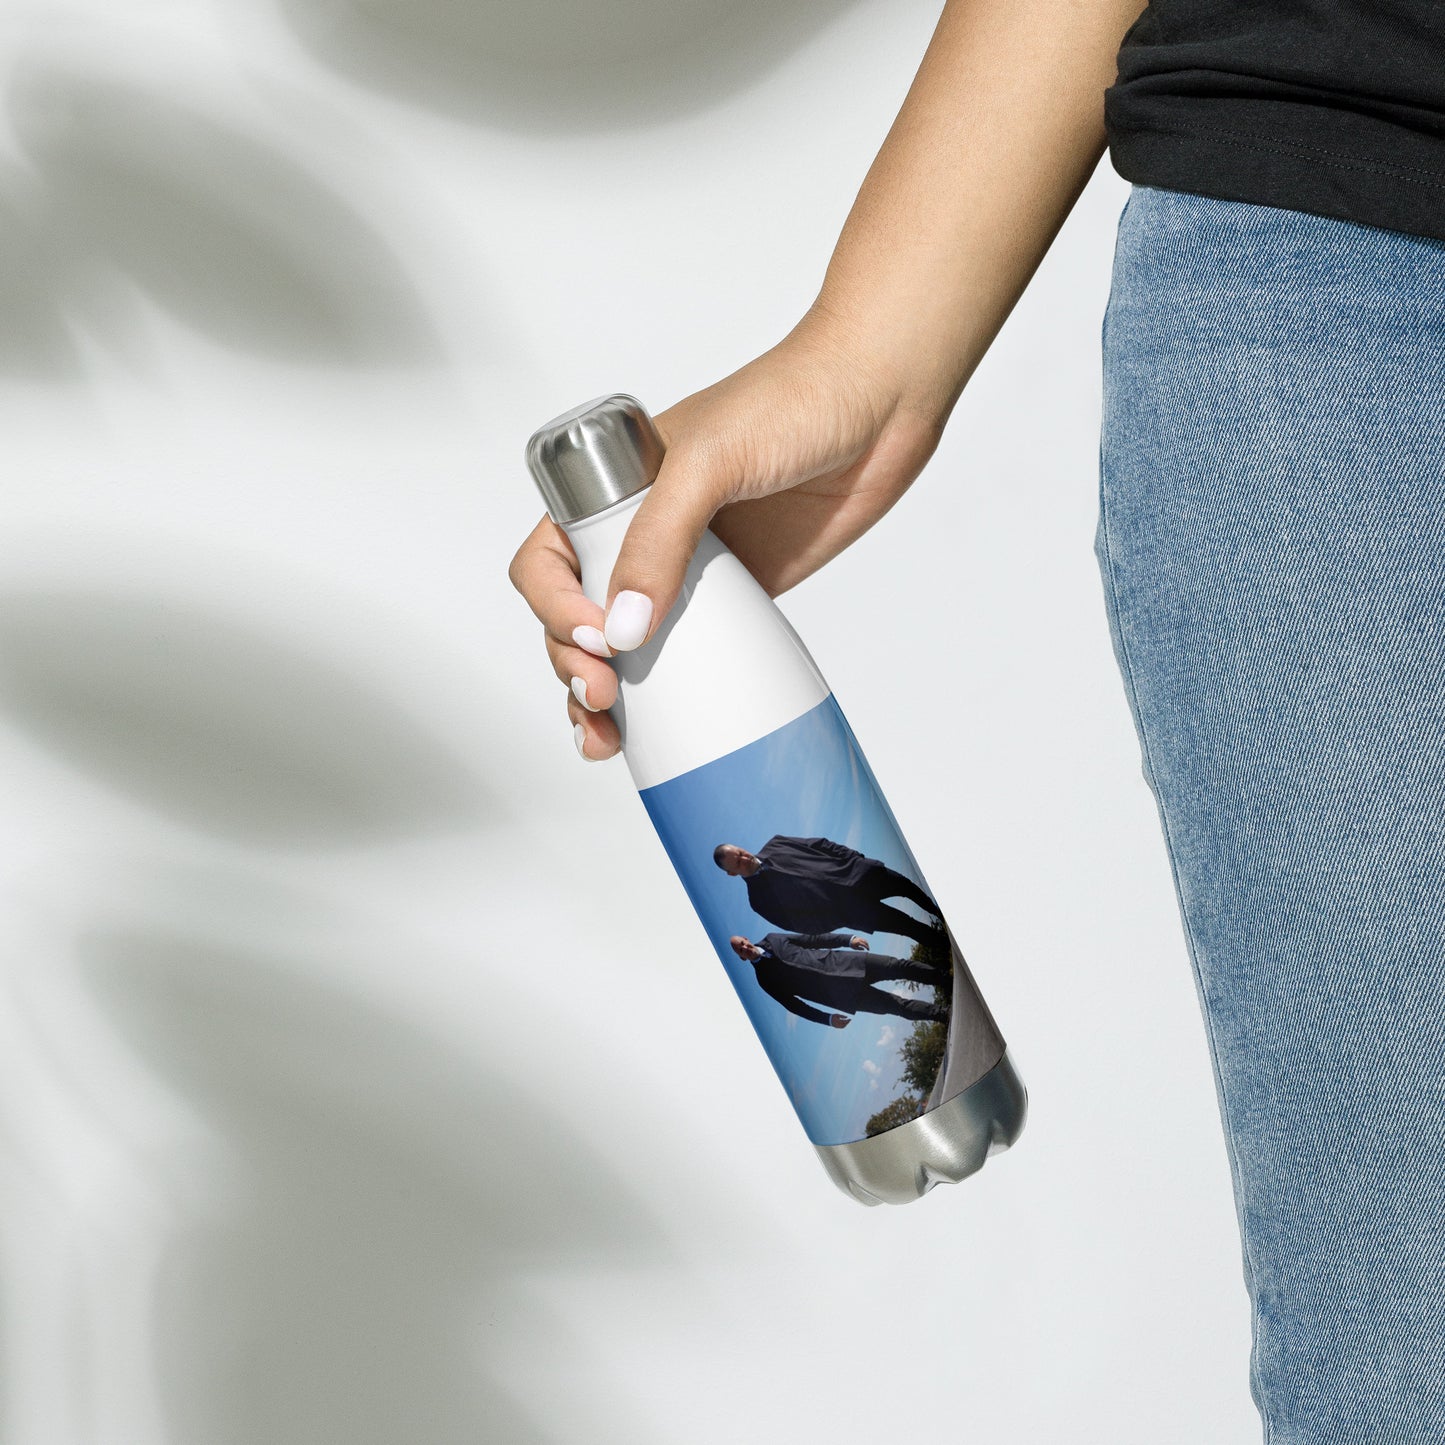 Disrupted Being, official photo and logo, Stainless Steel Water Bottle